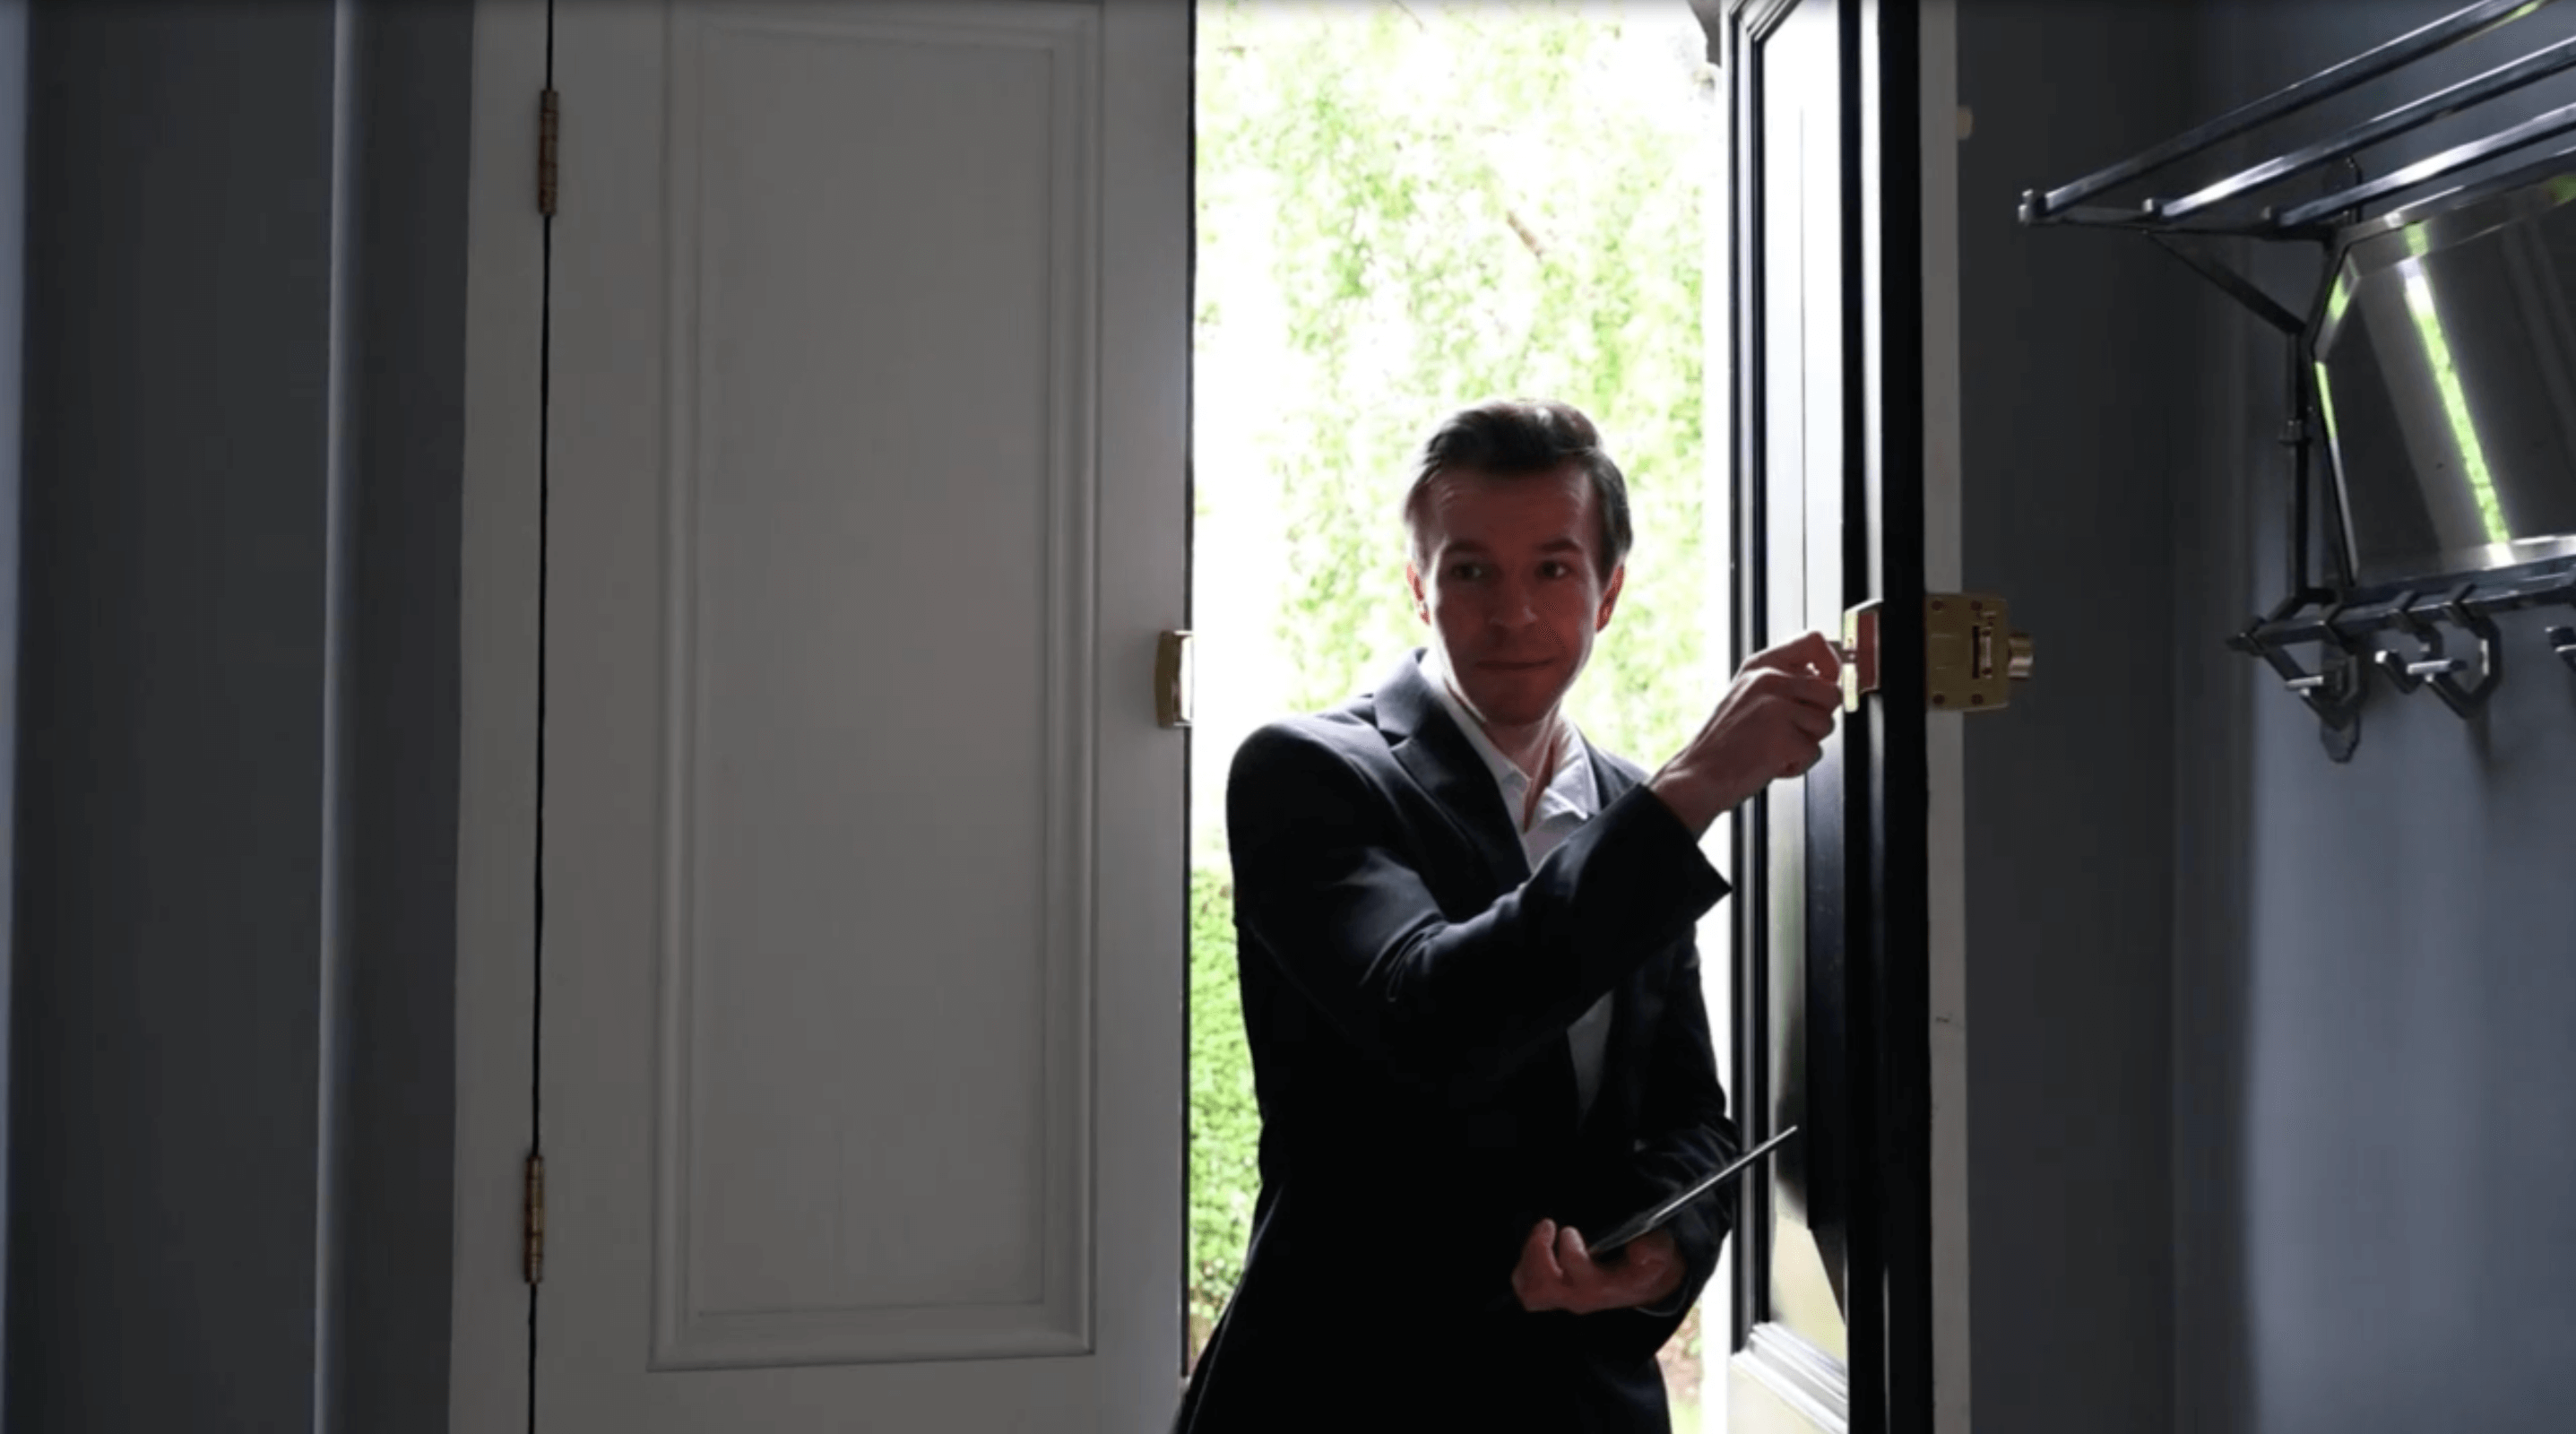 person in suit entering a home